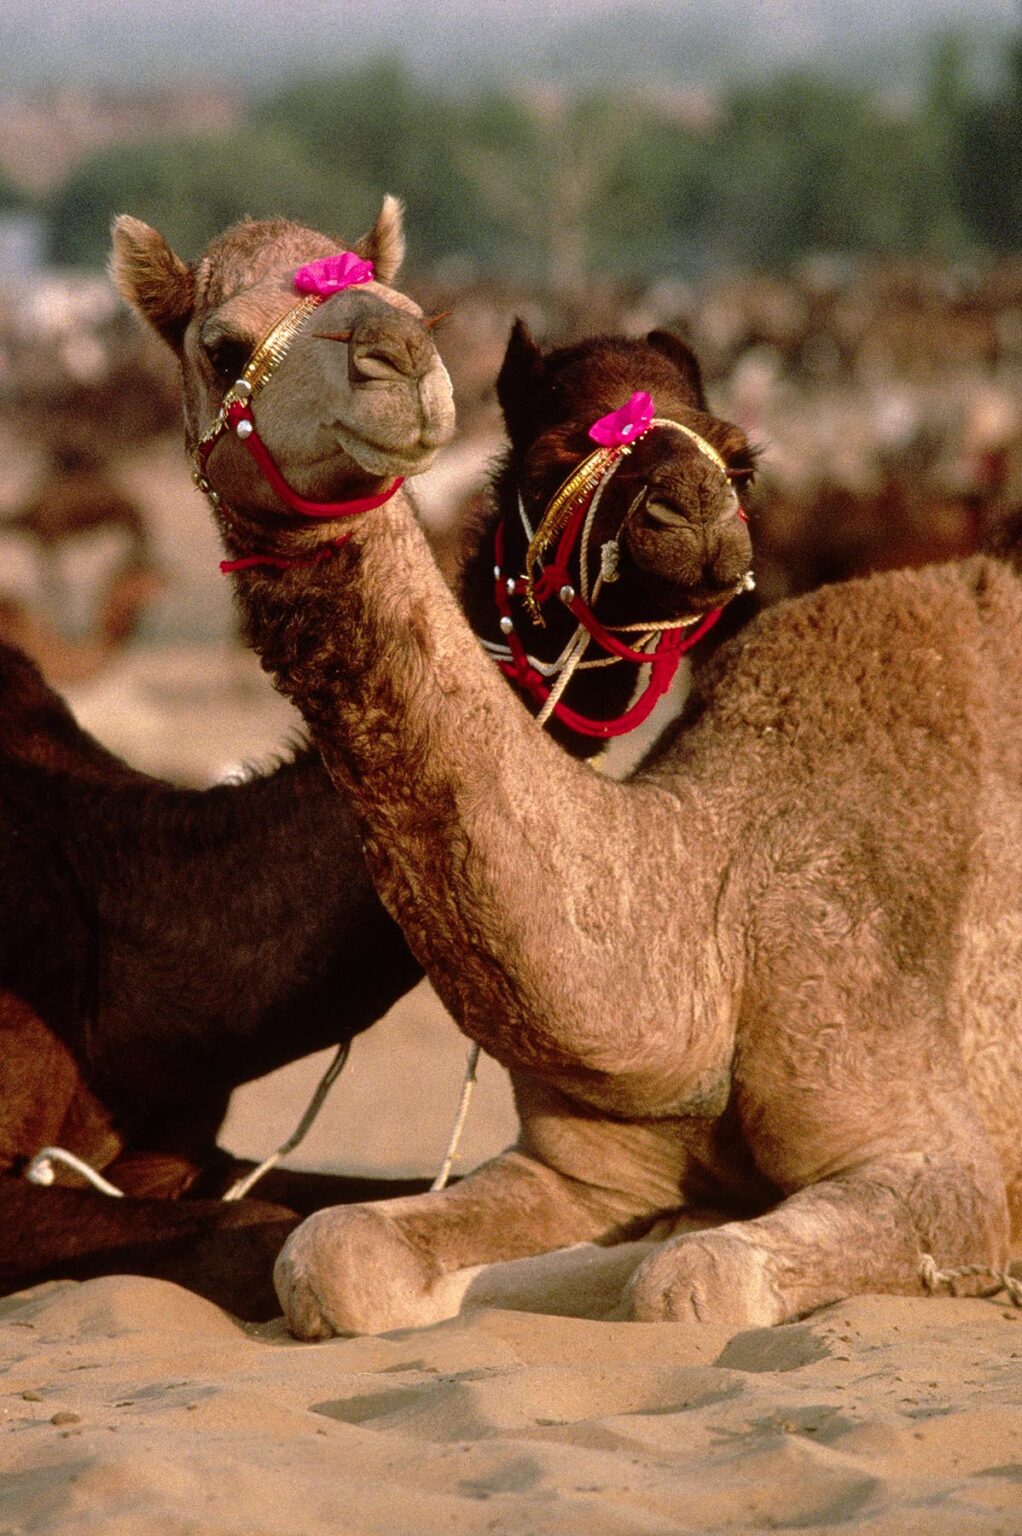 CAMELS with decorative JEWELRY on their face at the PUSHKAR CAMEL FAIR, a 5 day religious festival - RAJASTHAN, INDIA